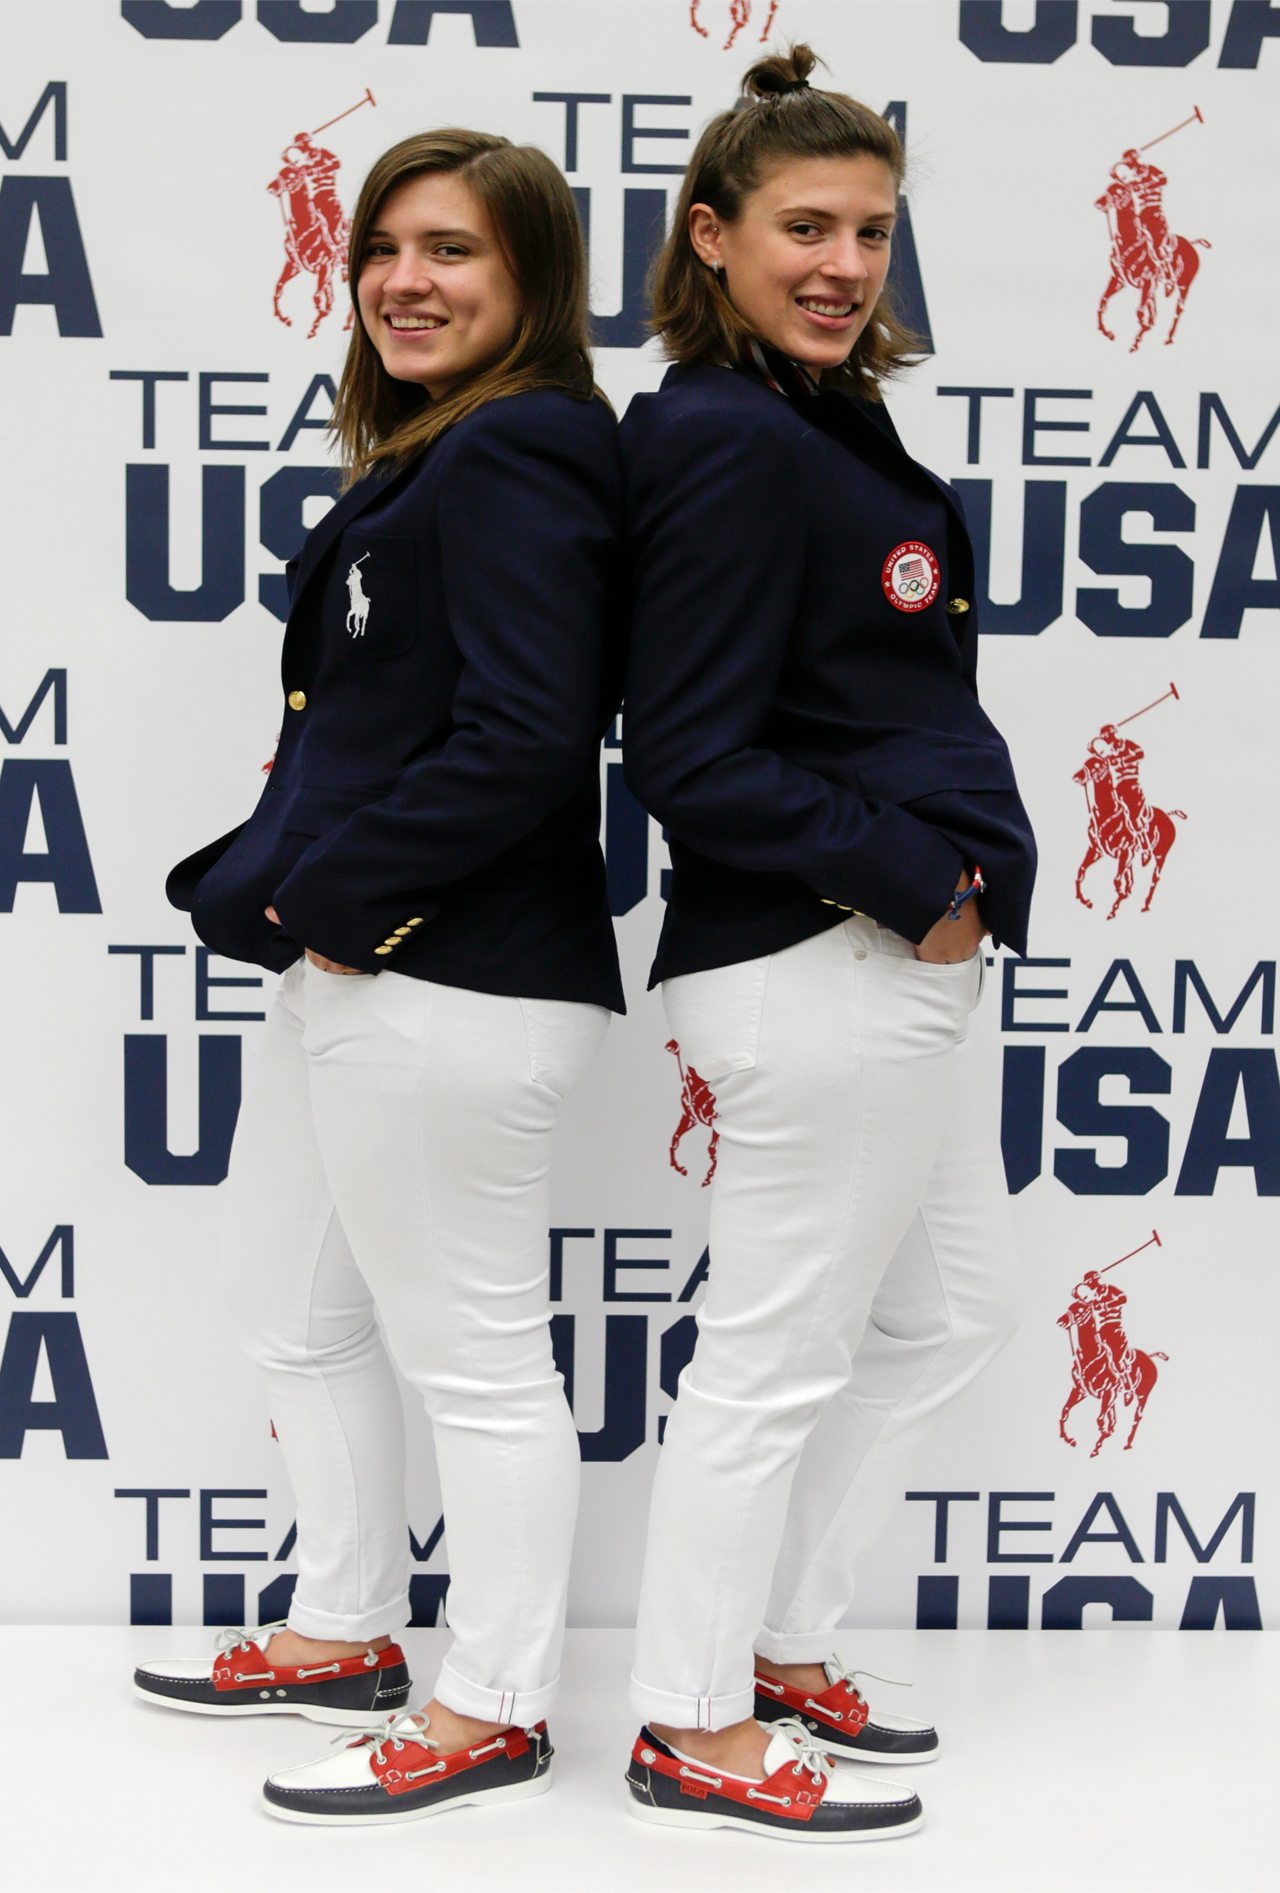 Red, white, blue and flashy: USA’s Opening Ceremony gear